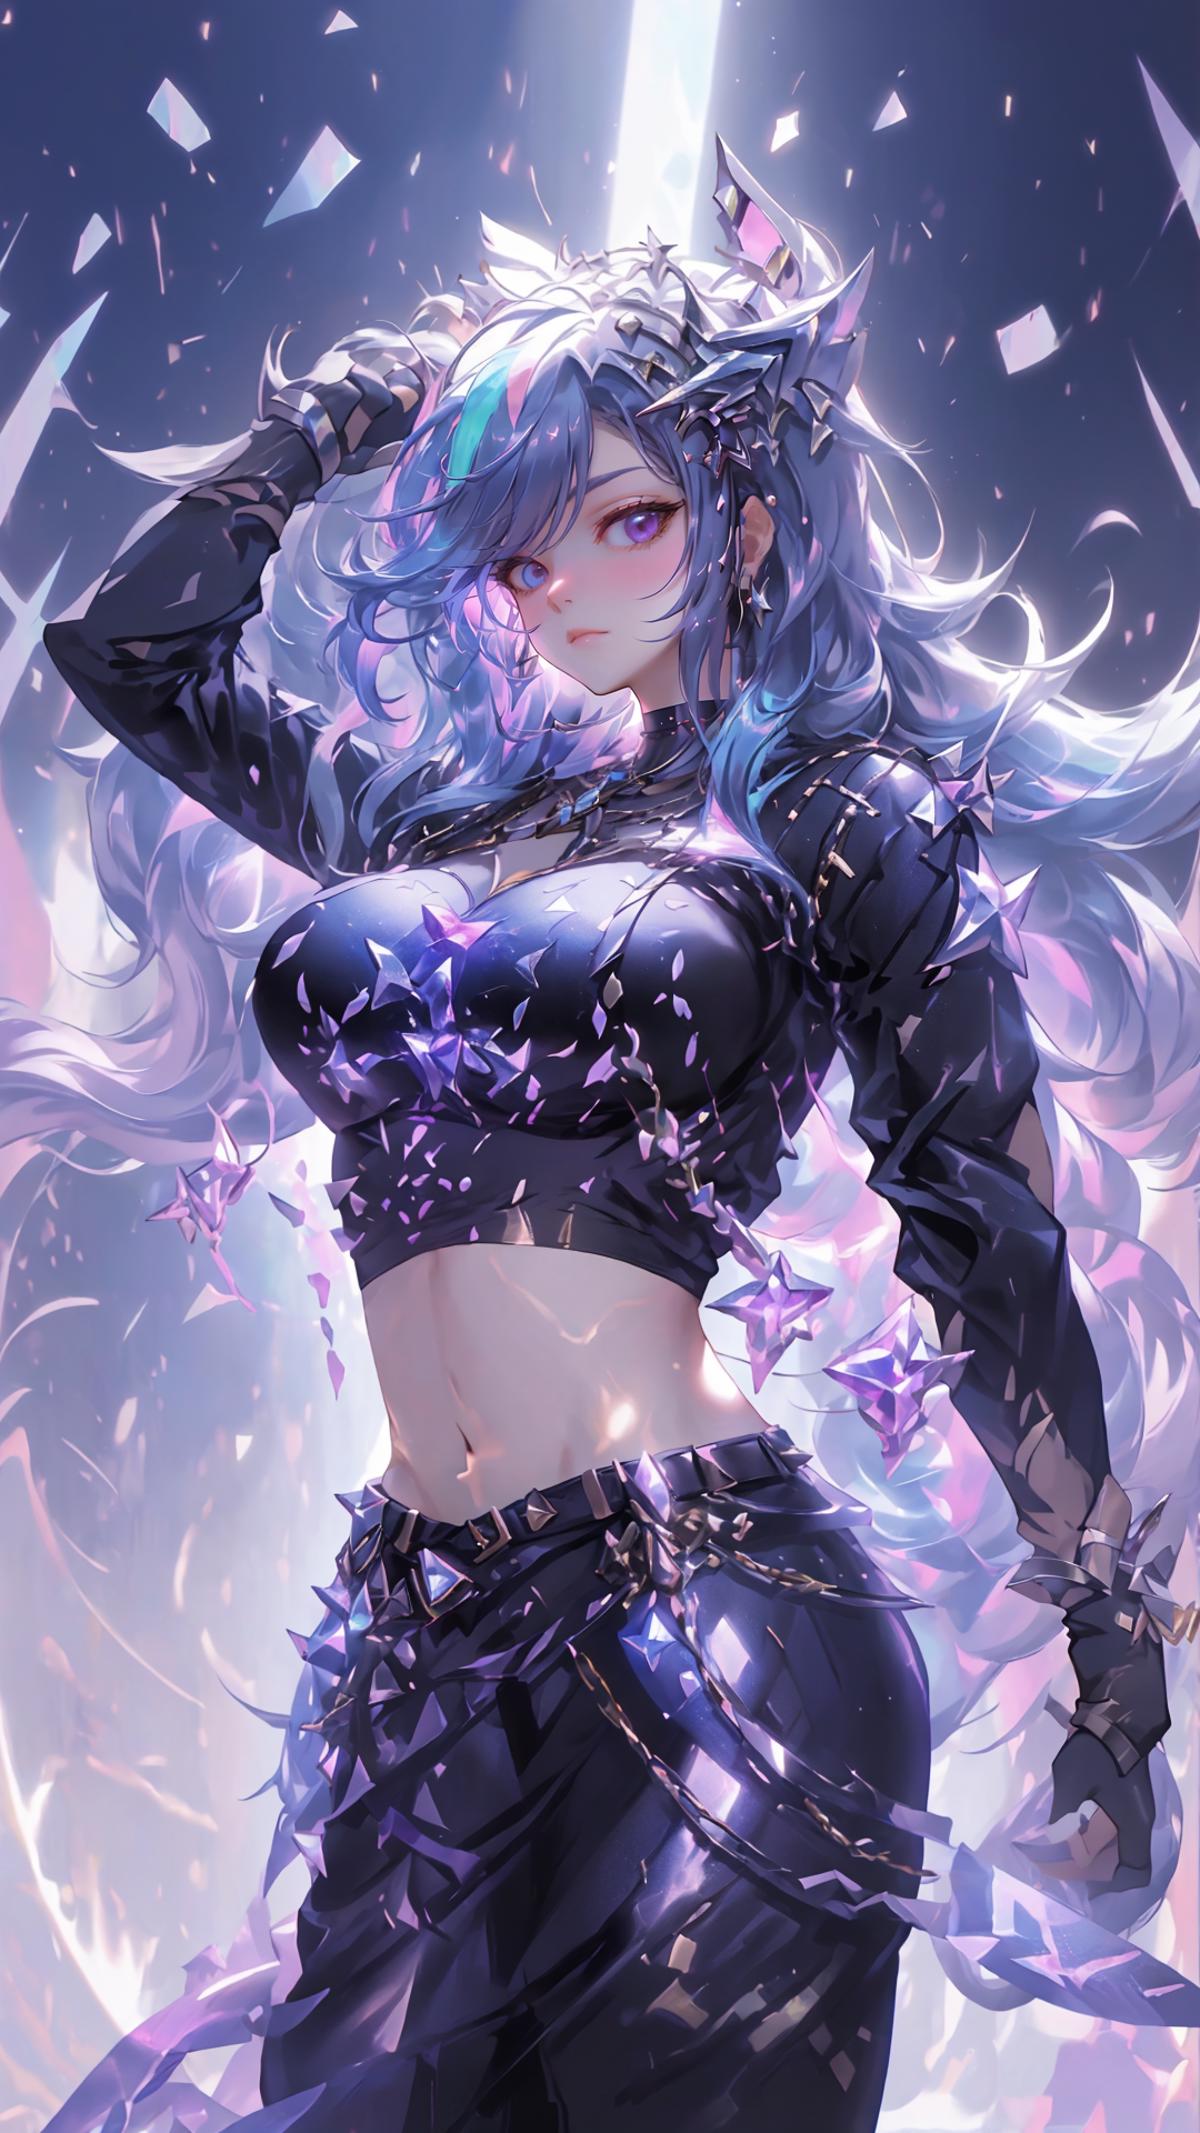 KDA (league of legends) image by 123An